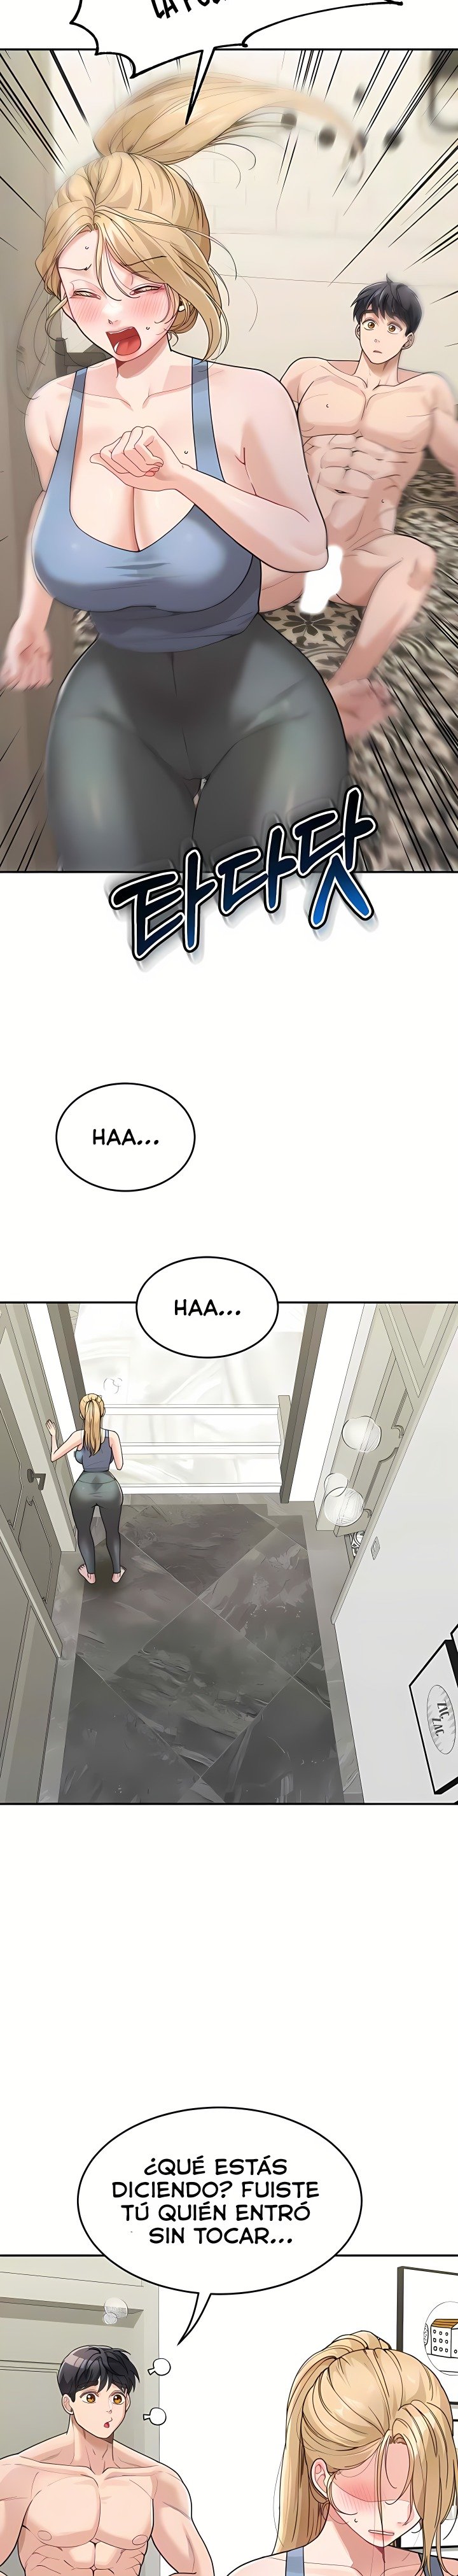 is-it-your-mother-or-sister-raw-chap-30-3